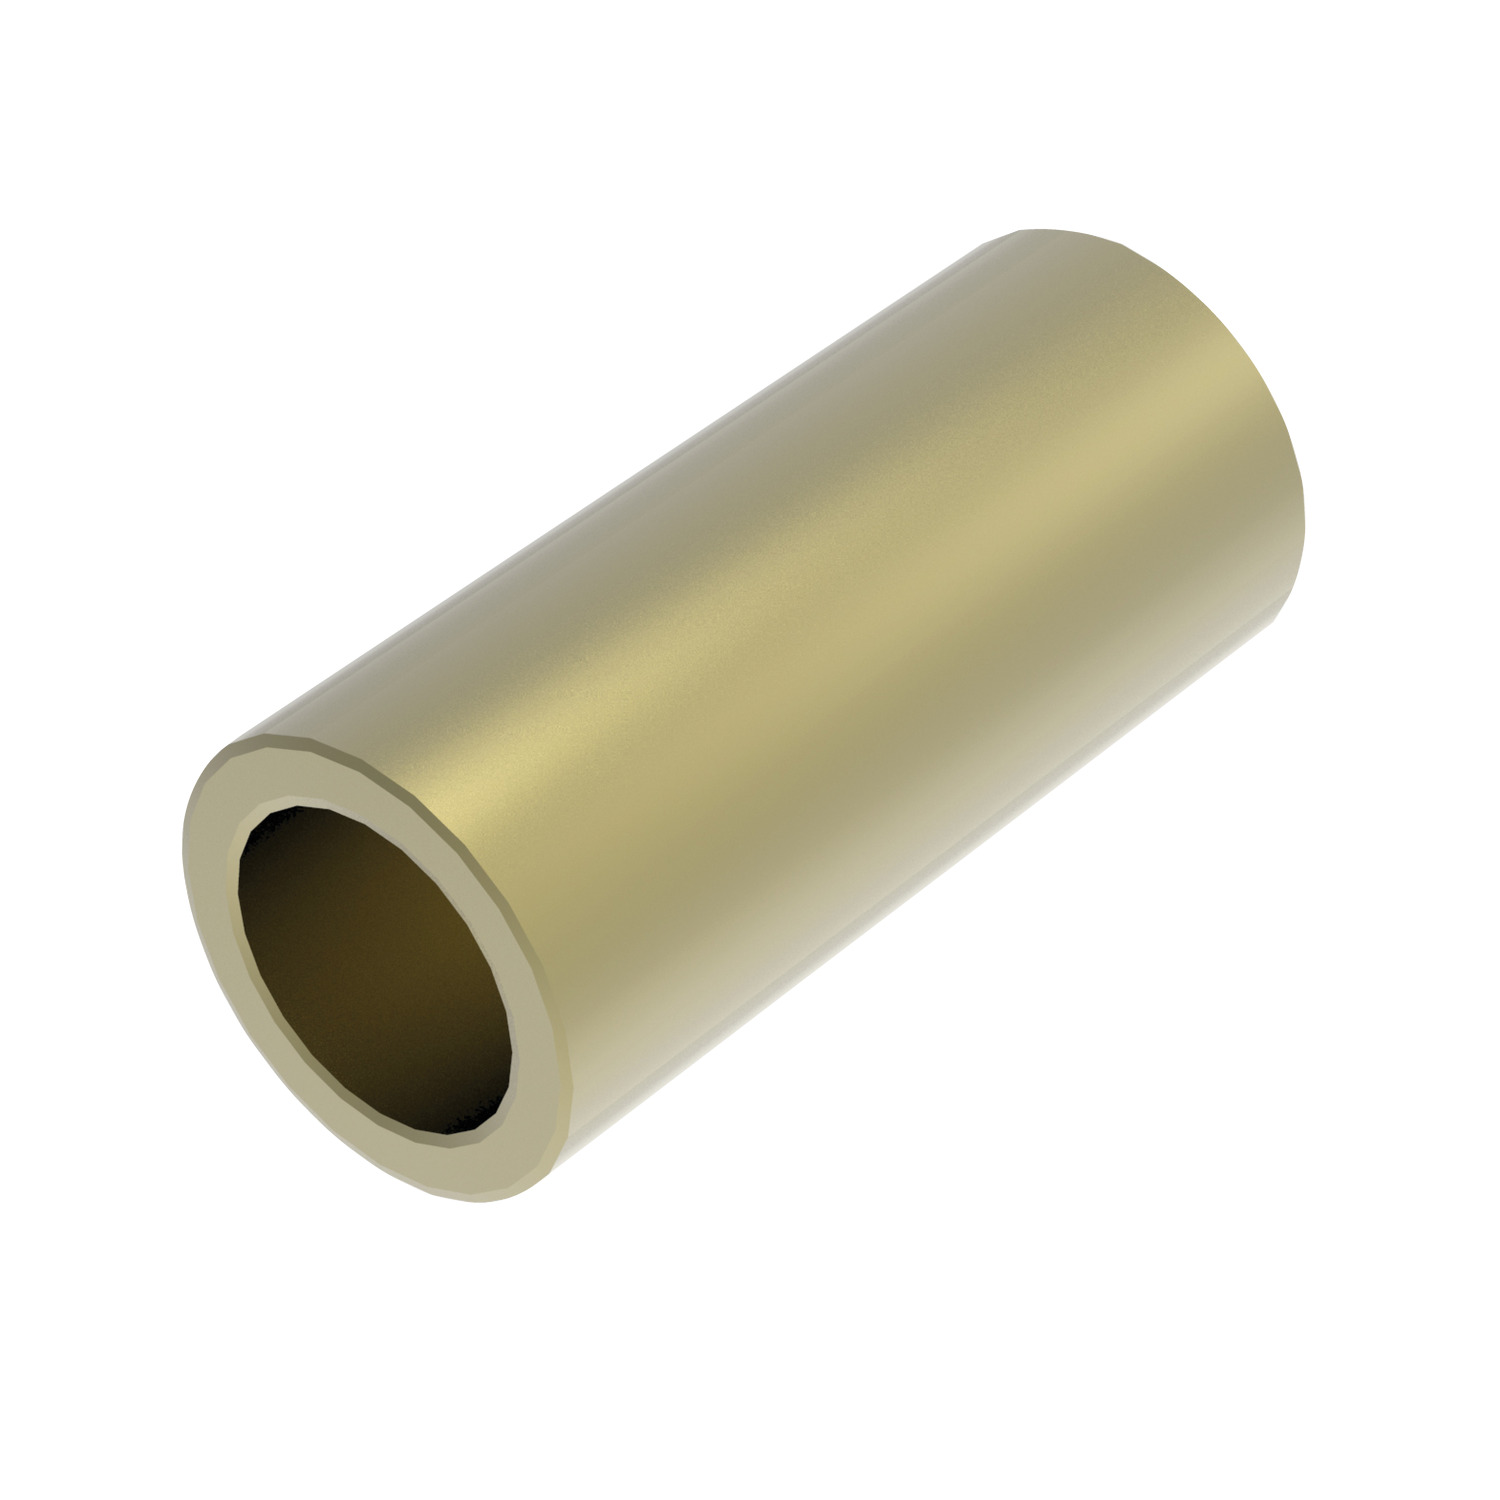 P1330 - Cylindrical Spacers - Brass